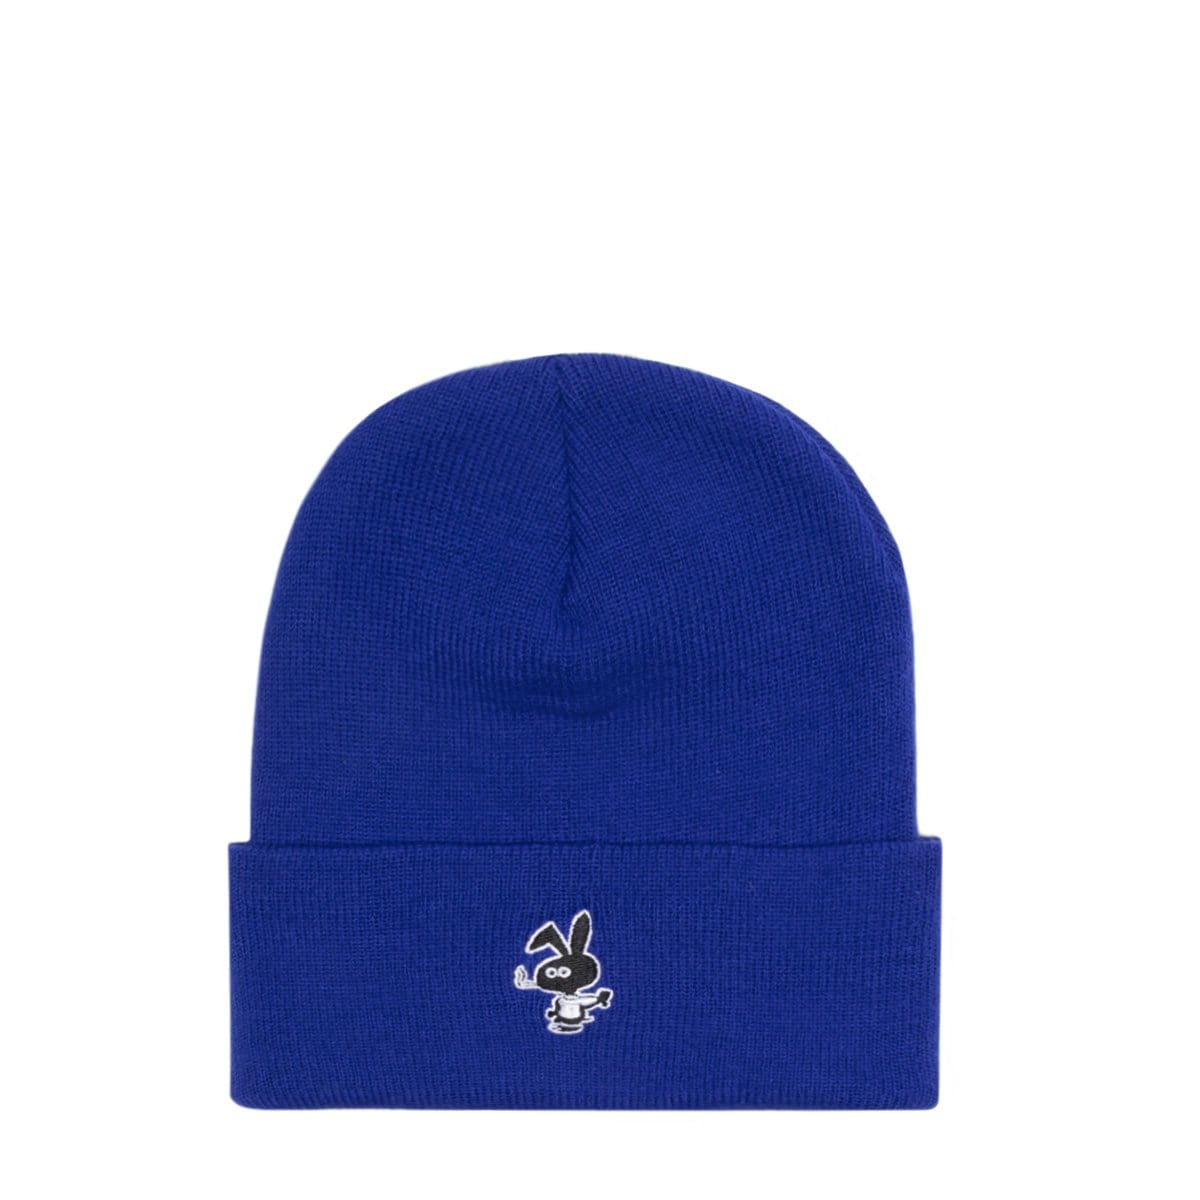 Cold World Frozen Goods Headwear ROYAL BLUE / OS COLD BUNNY BEANIE